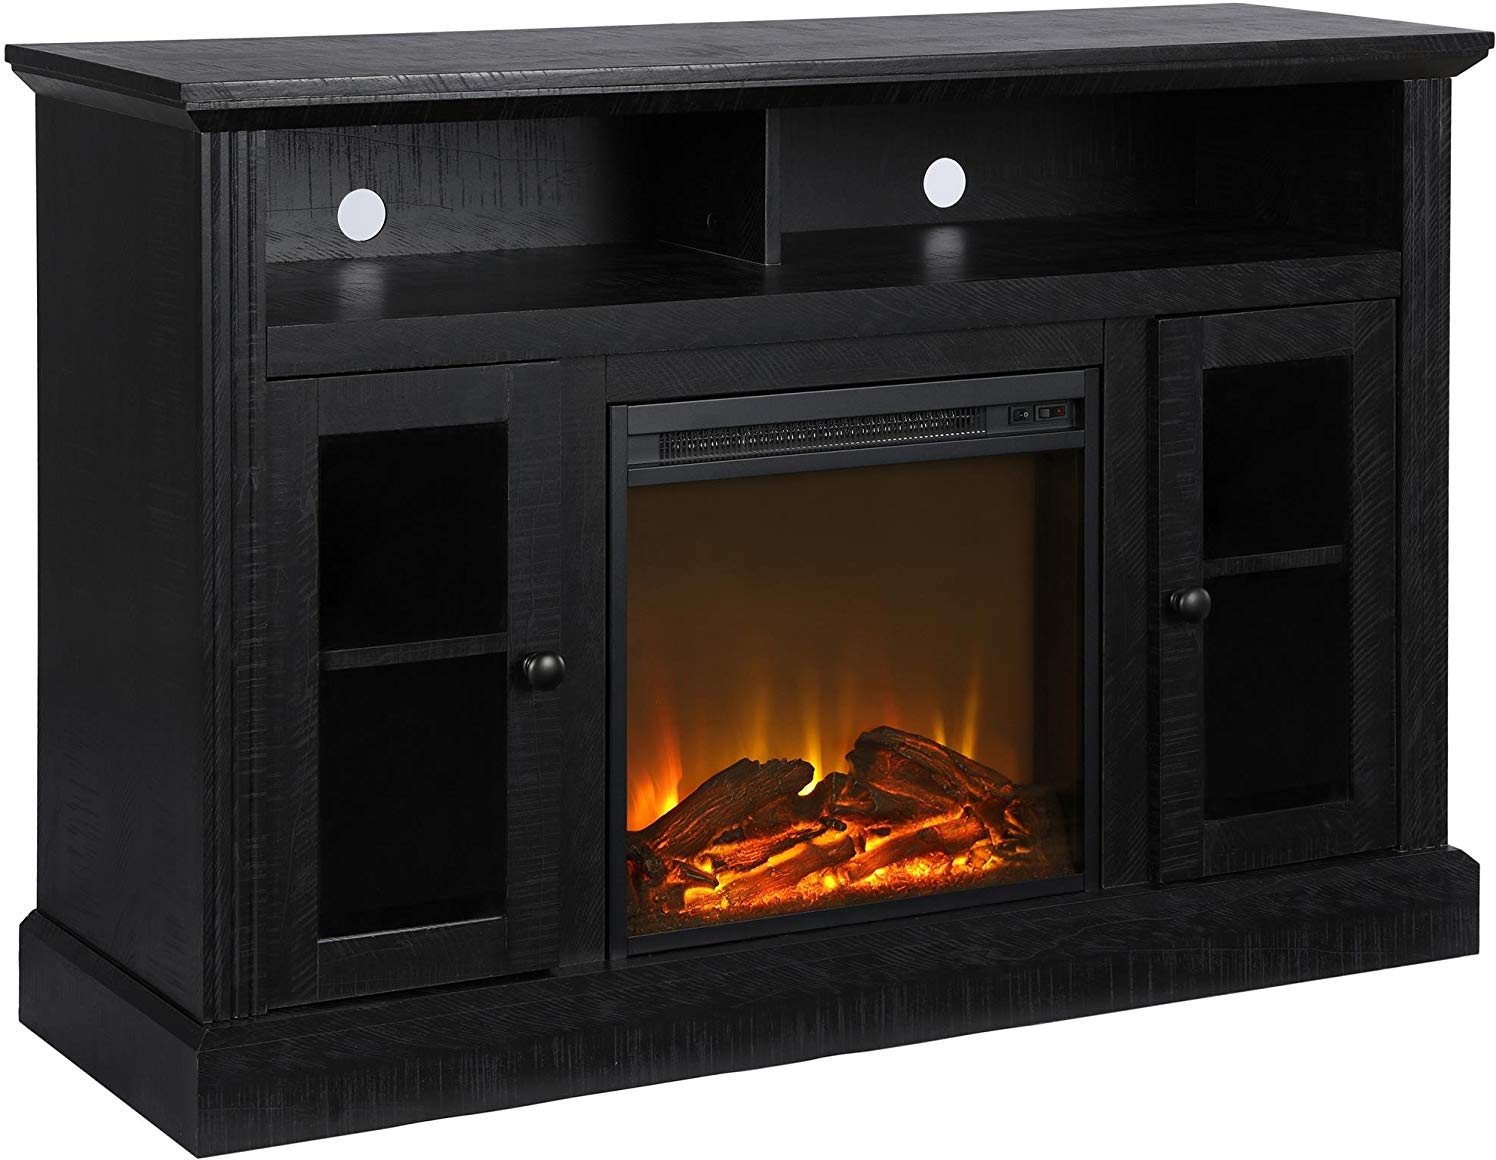 65 Inch Tv Over Fireplace Lovely Details About A Chicago Fireplace Tv Stand for Tvs Up to 50 Inches Black